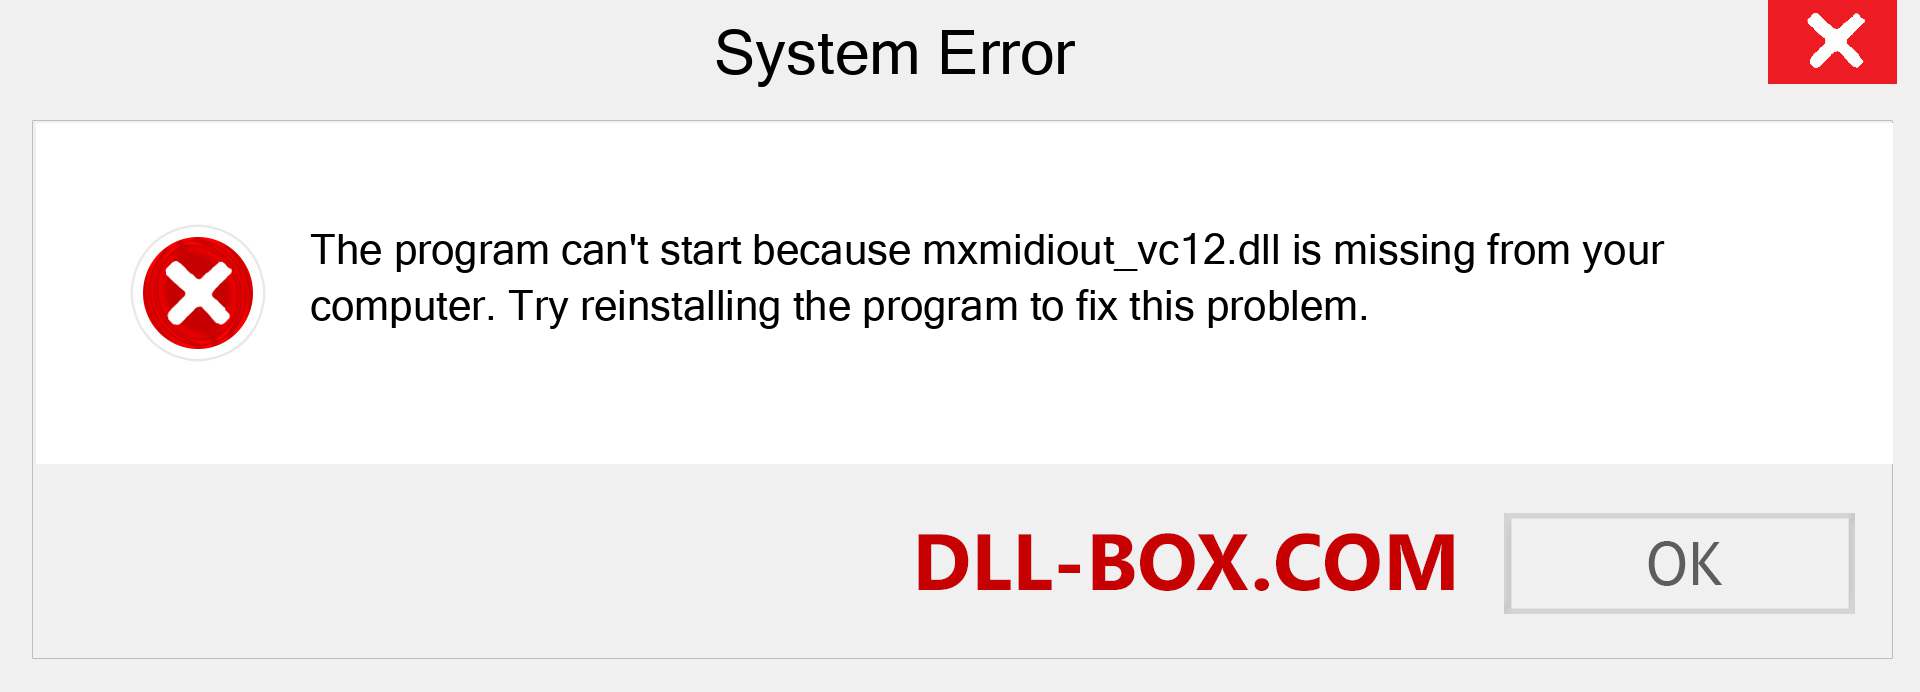  mxmidiout_vc12.dll file is missing?. Download for Windows 7, 8, 10 - Fix  mxmidiout_vc12 dll Missing Error on Windows, photos, images